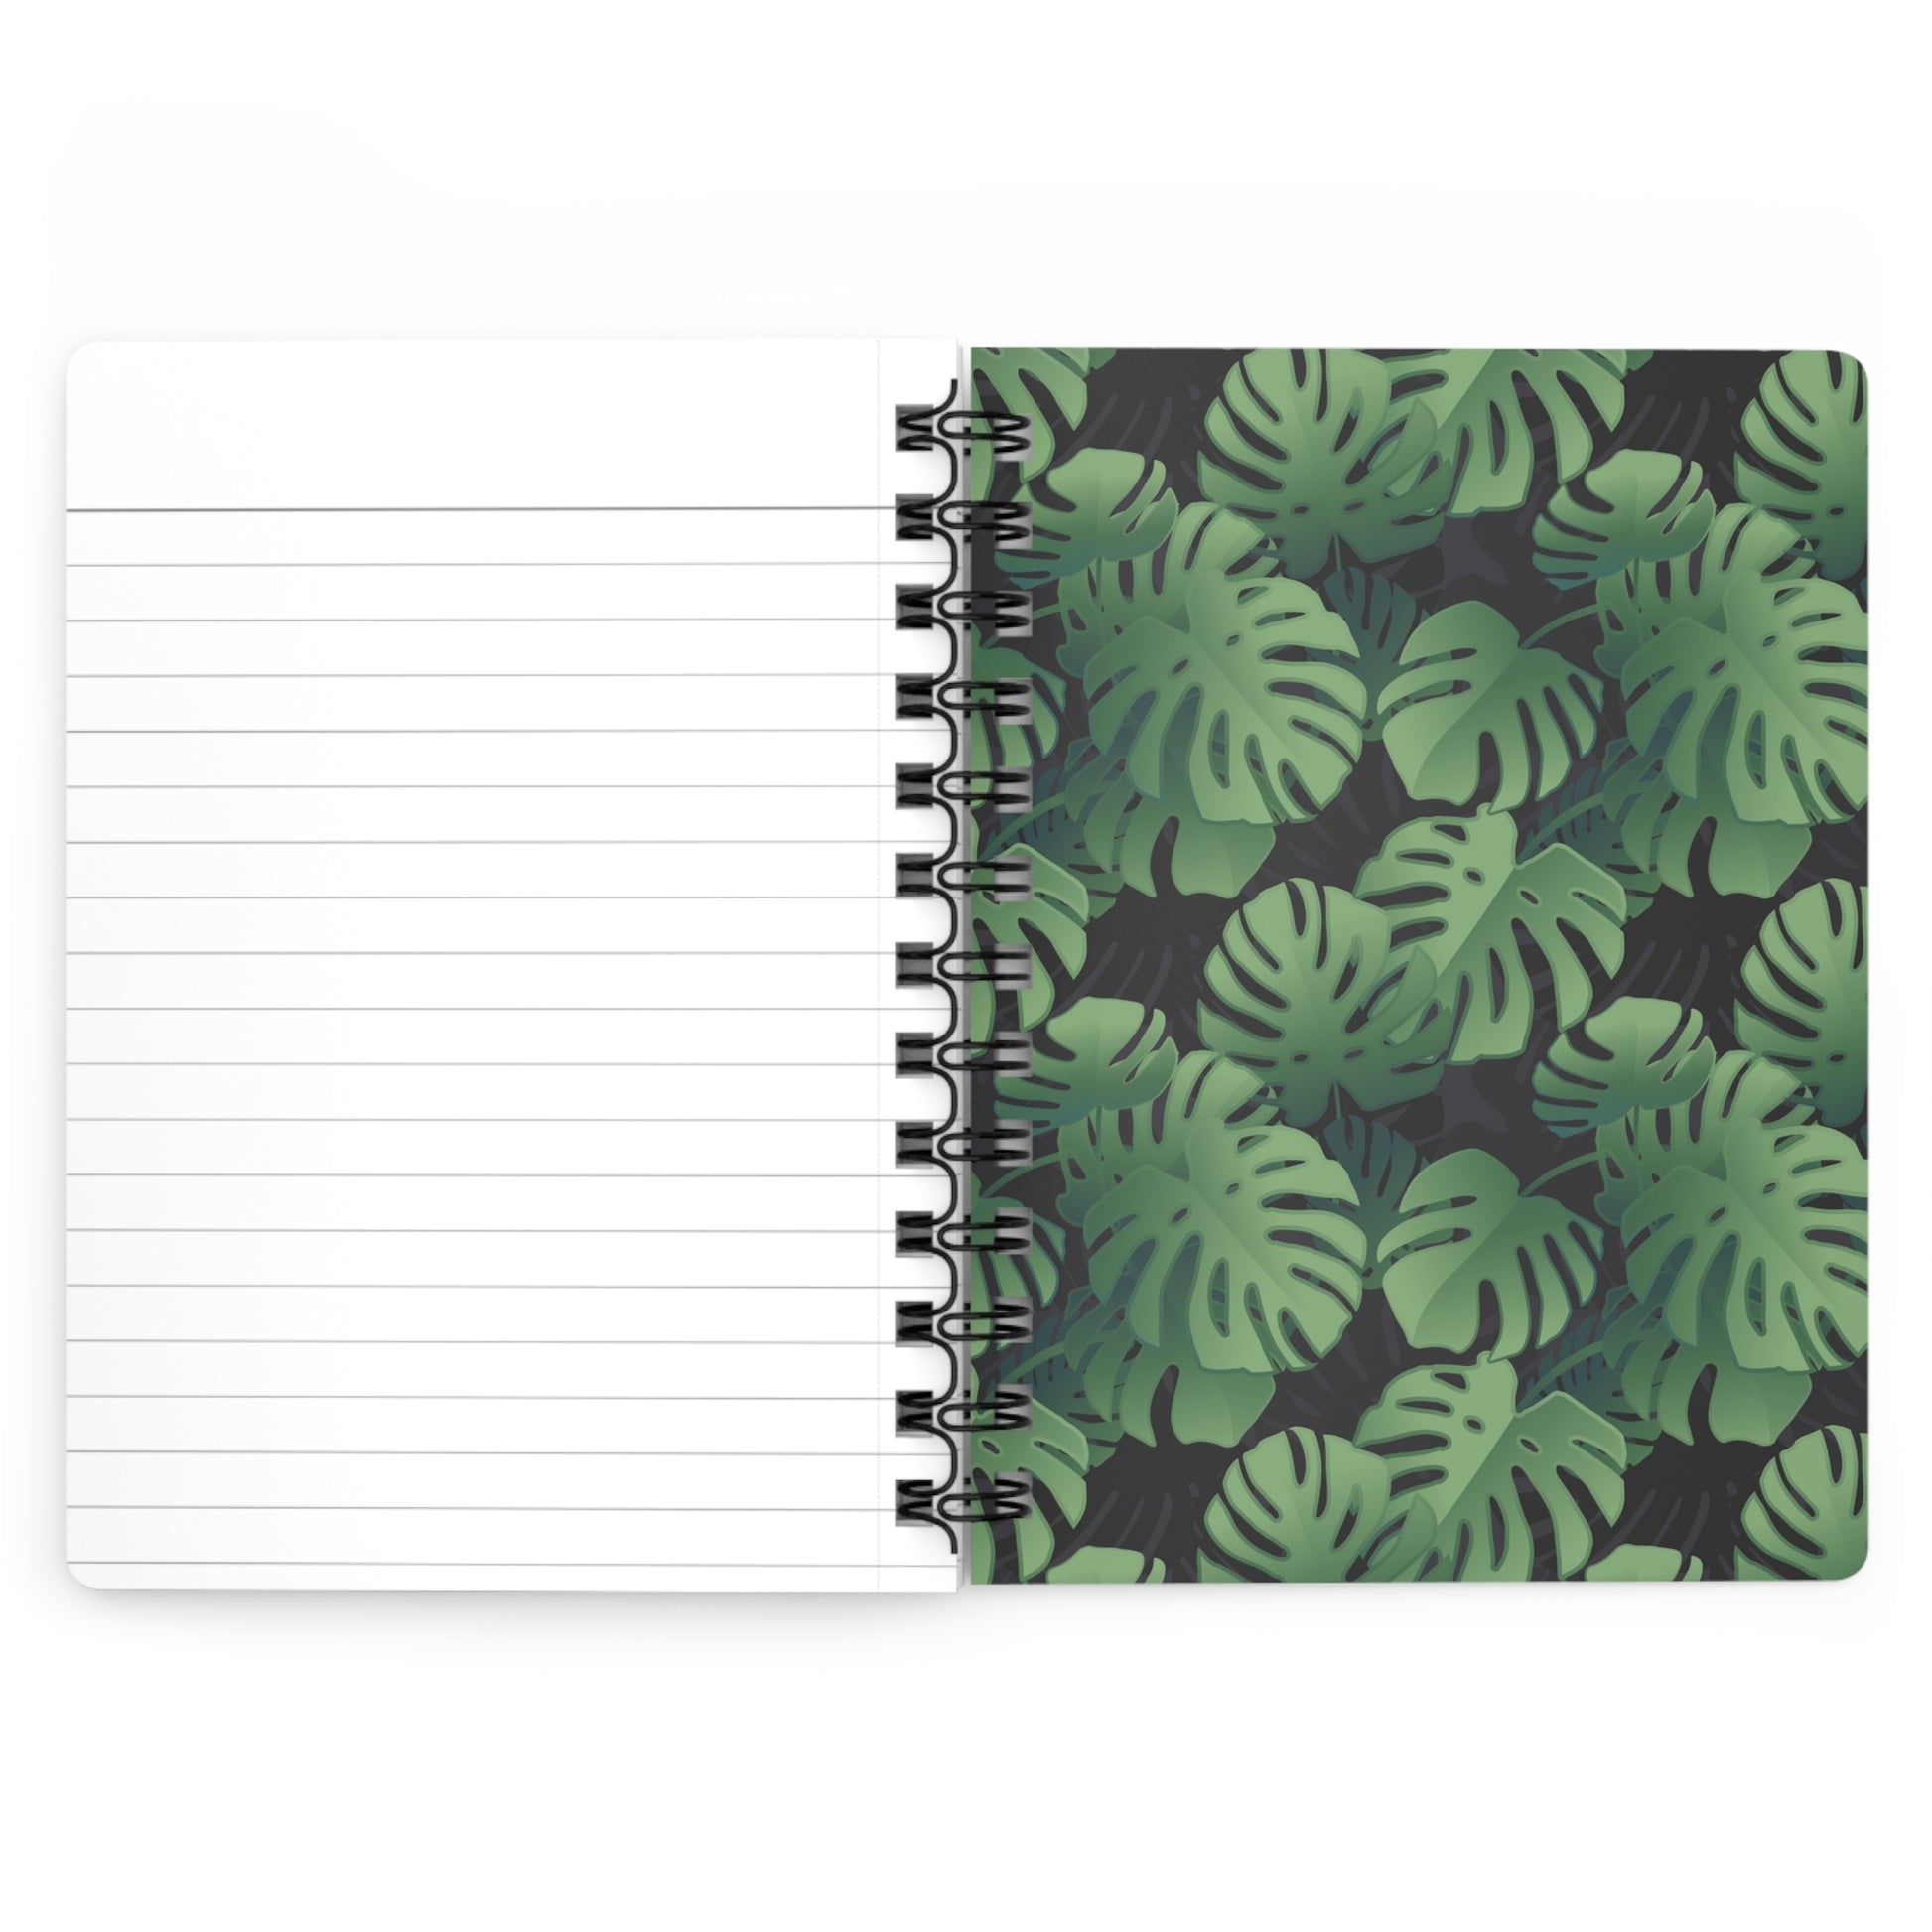 Oh My Soul Be Still all over print spiral bound journal notebook